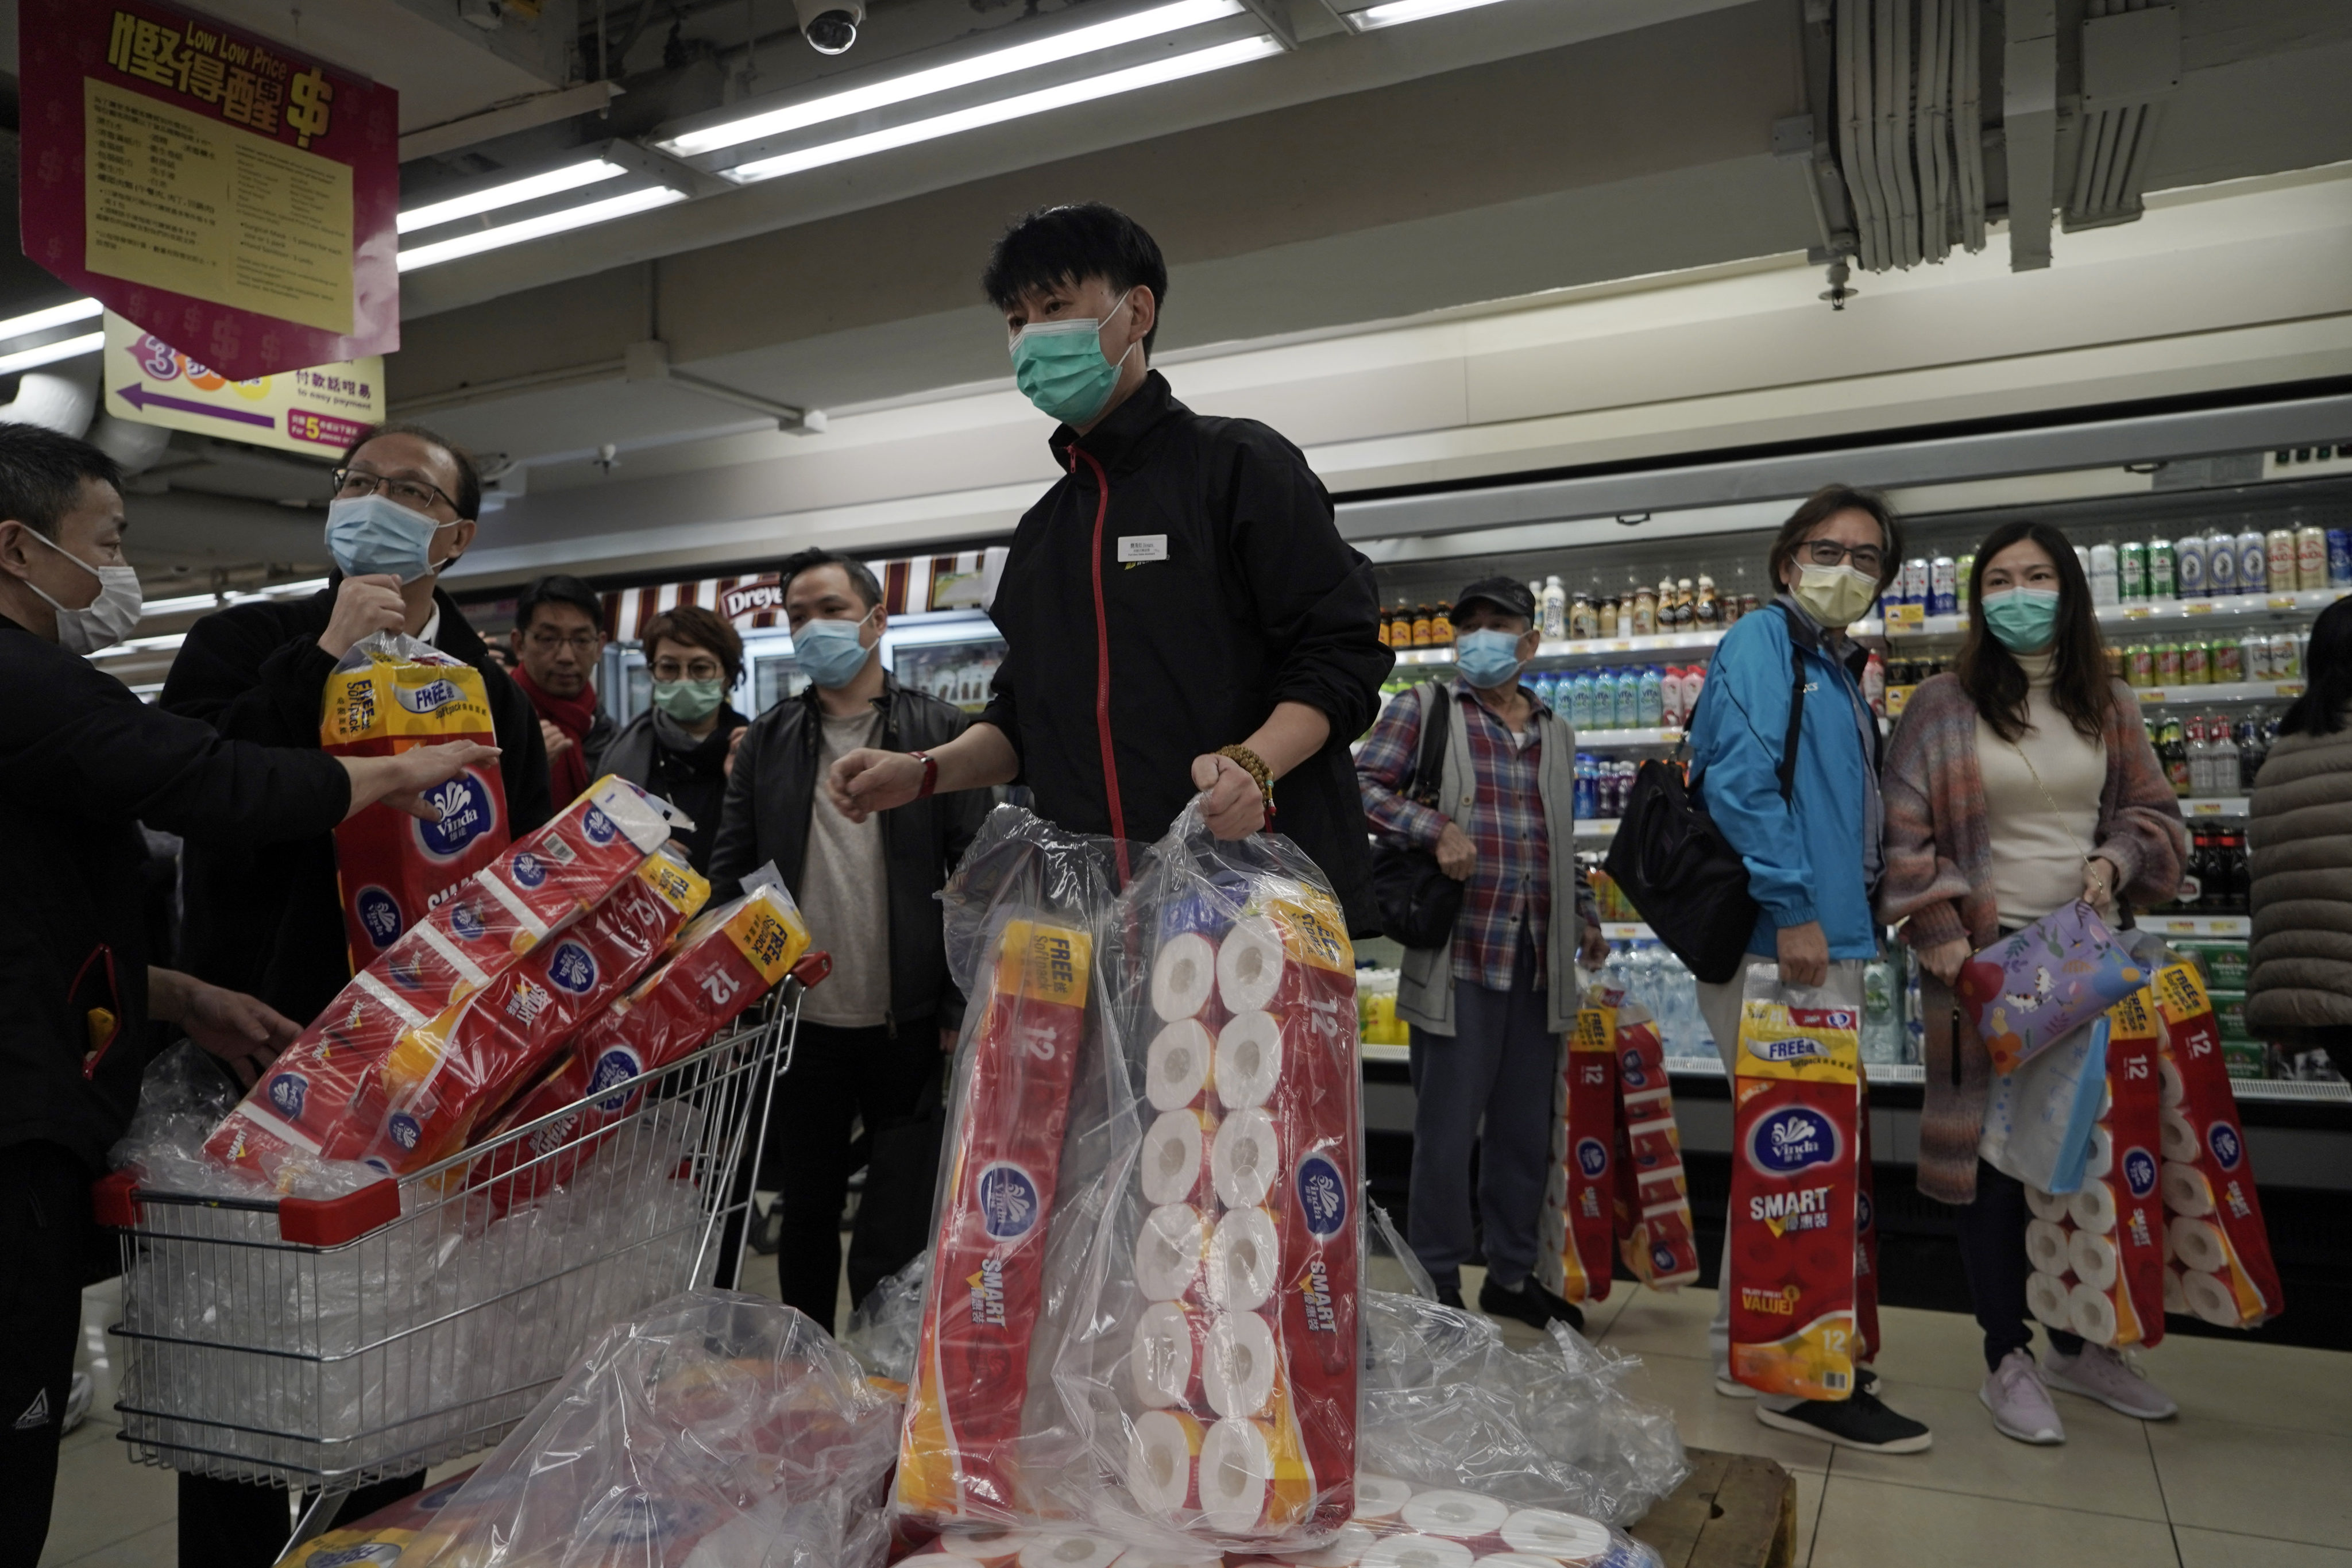 Customers queue to buy toilet paper in a supermarket in Hong Kong on February 14, 2020, a pandemic phenomena that led to widespread shortages in the city. Photo: AP